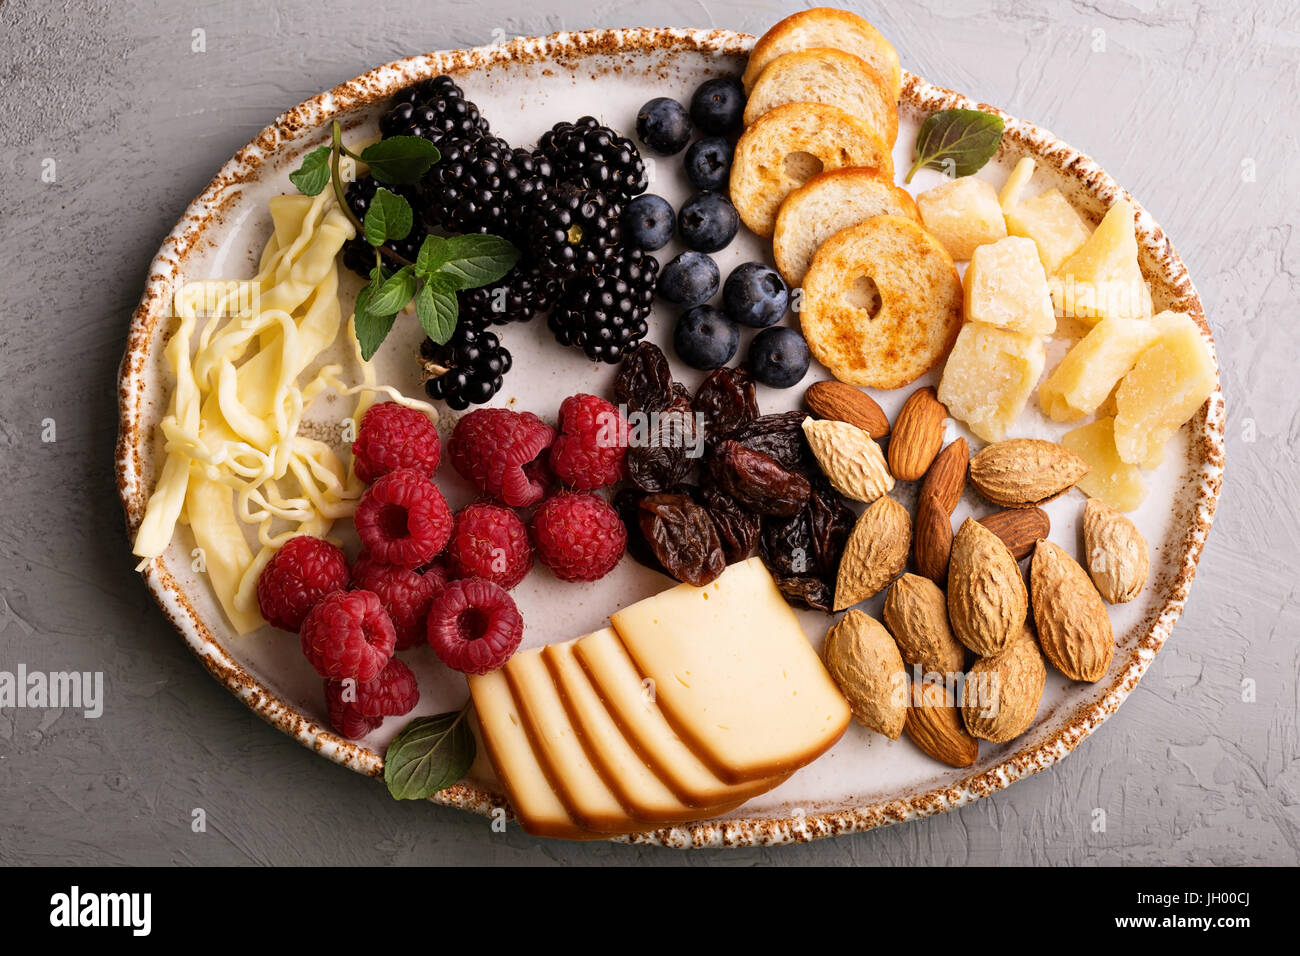 Cheese plate with nuts and berries Stock Photo